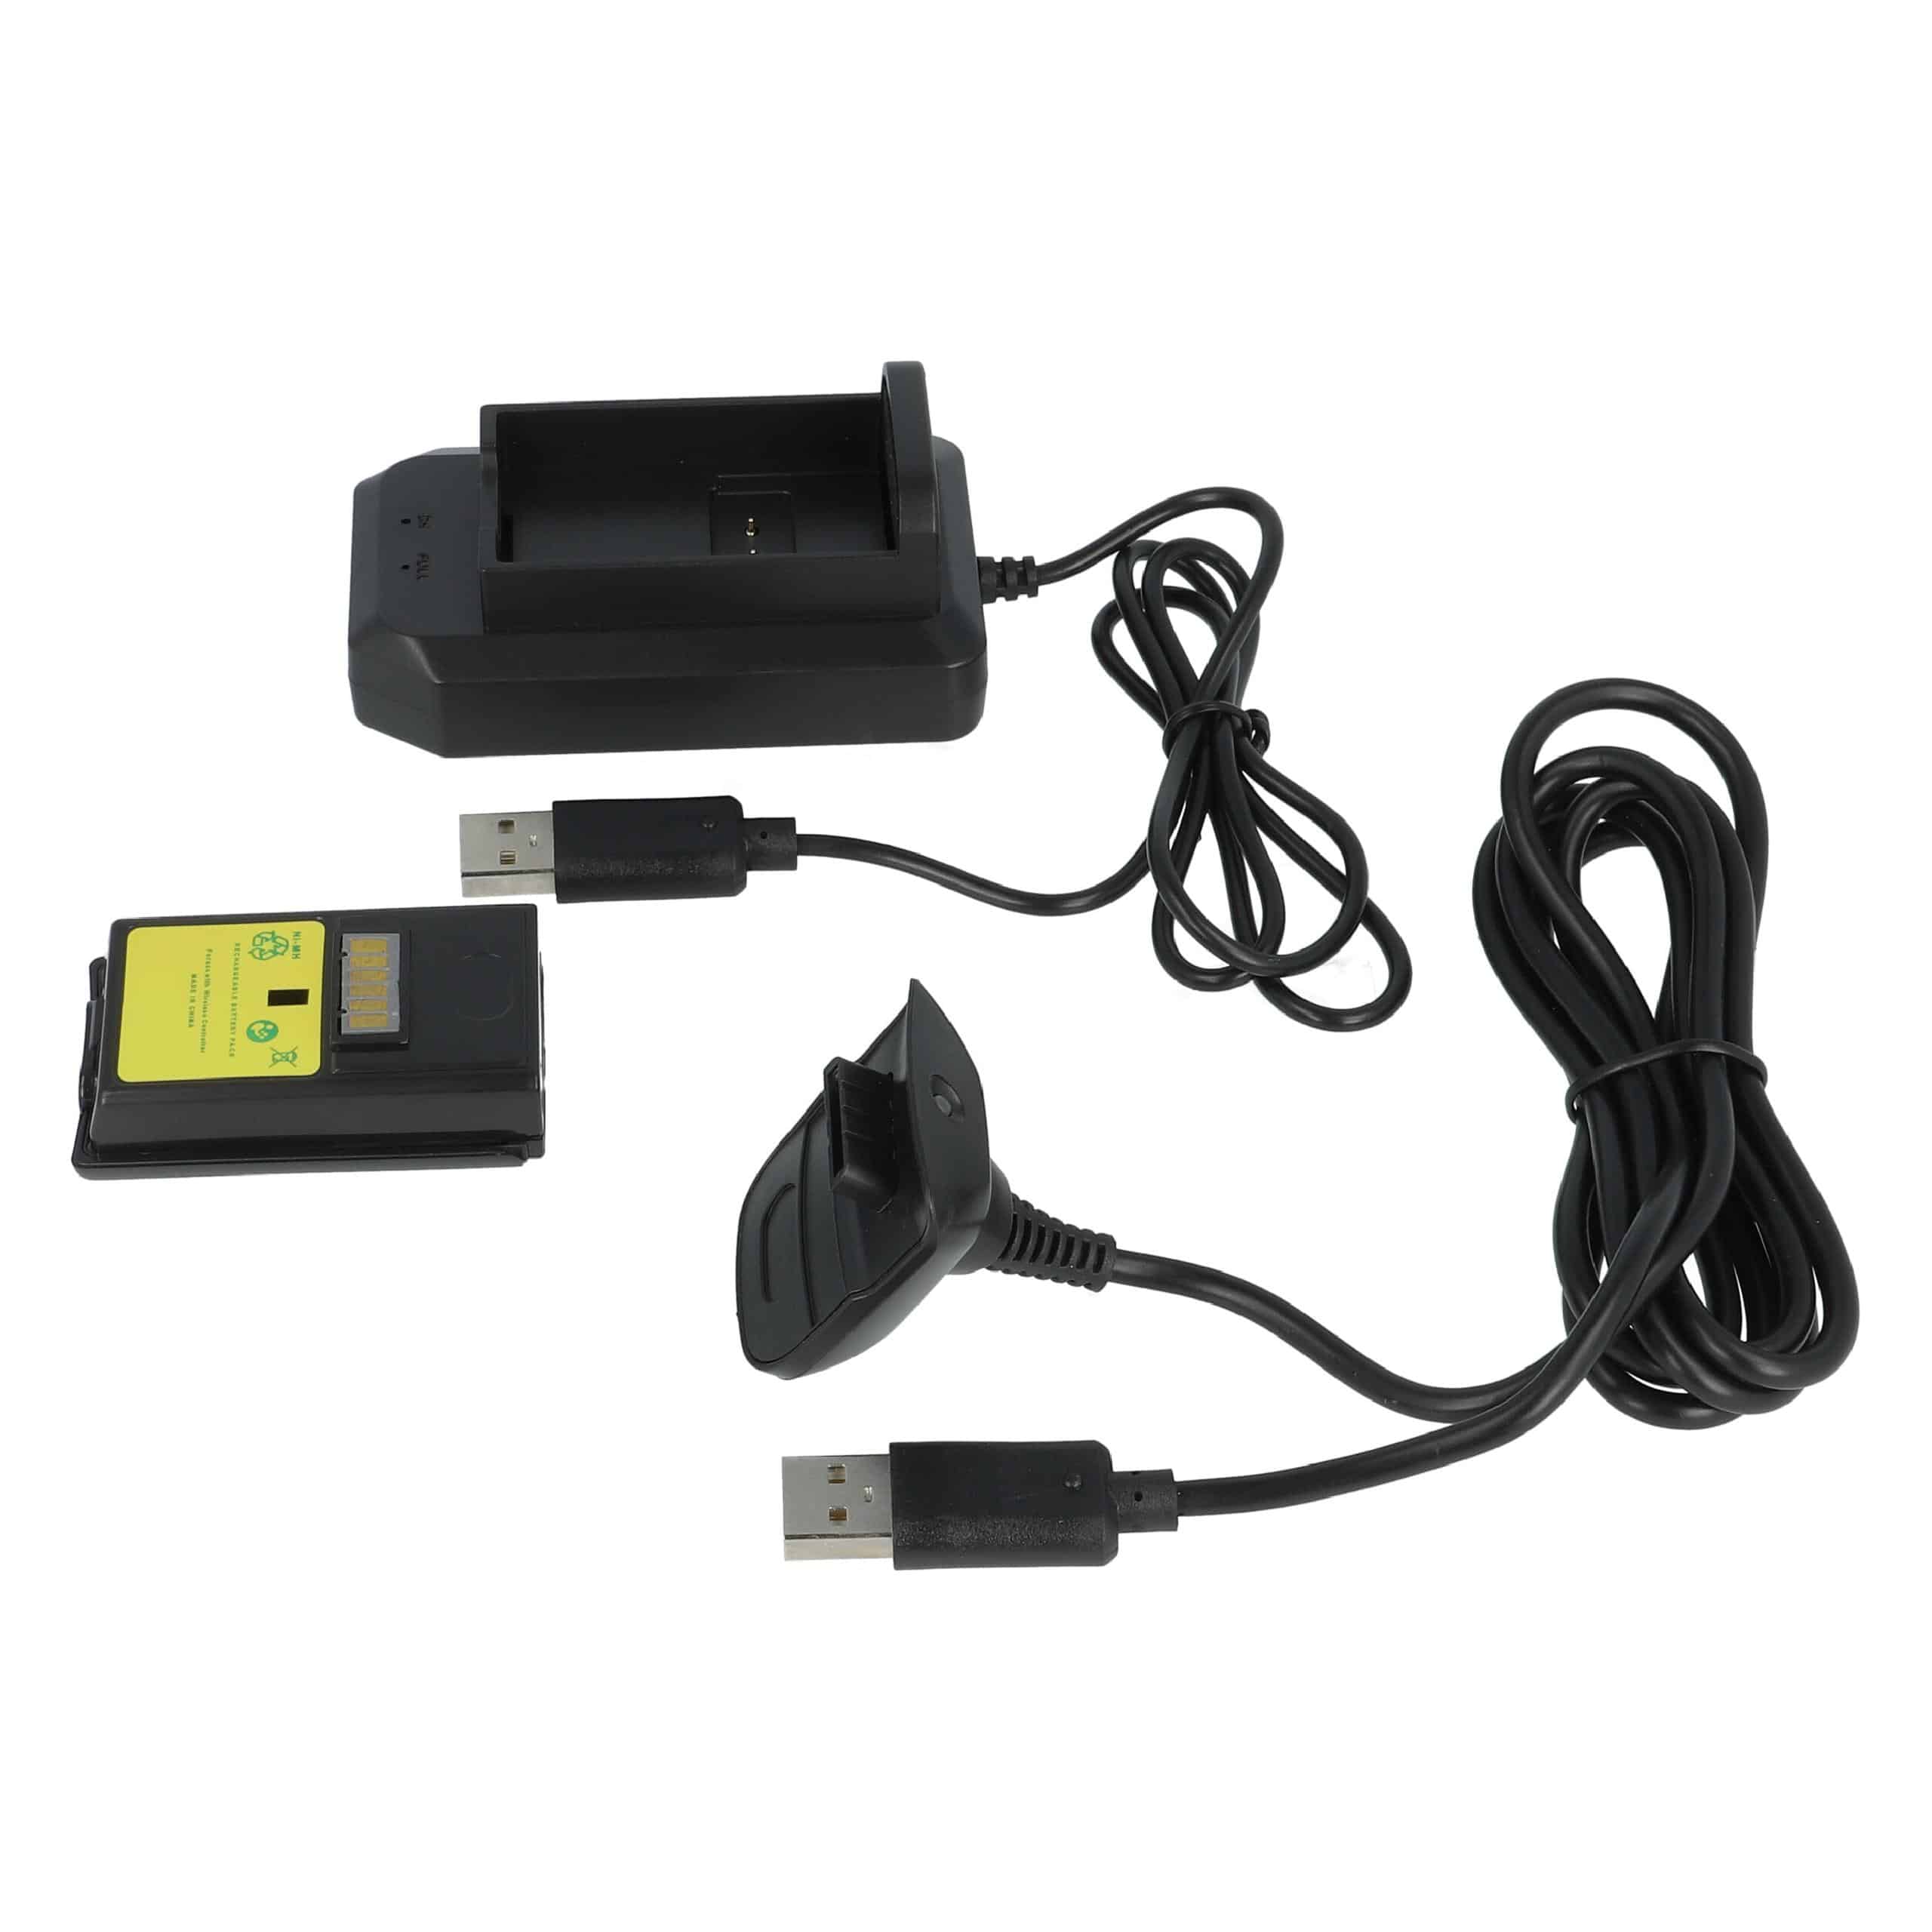 vhbw Play & Charge Kit - 1x battery, 1x charger, 1x charging cable Black